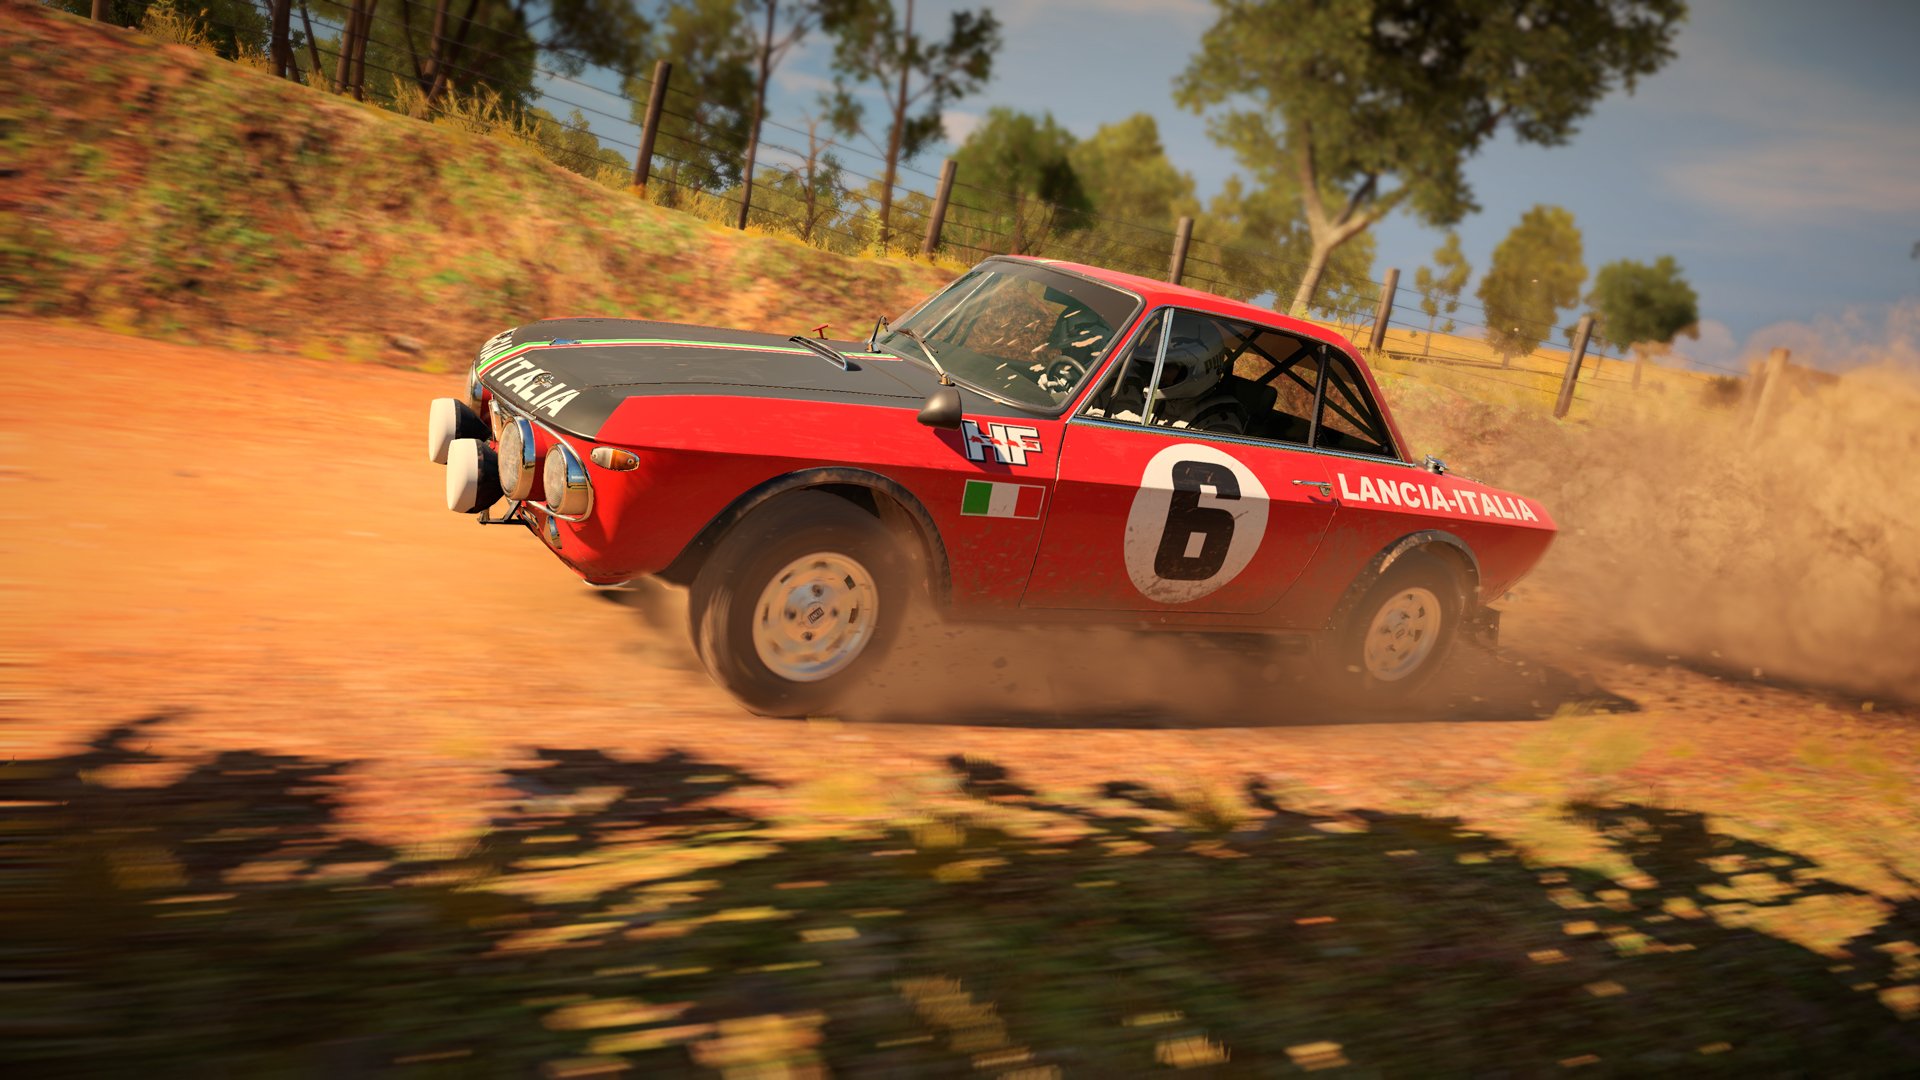 More information about "DiRT 4 Road Book: Creating Your Stage"